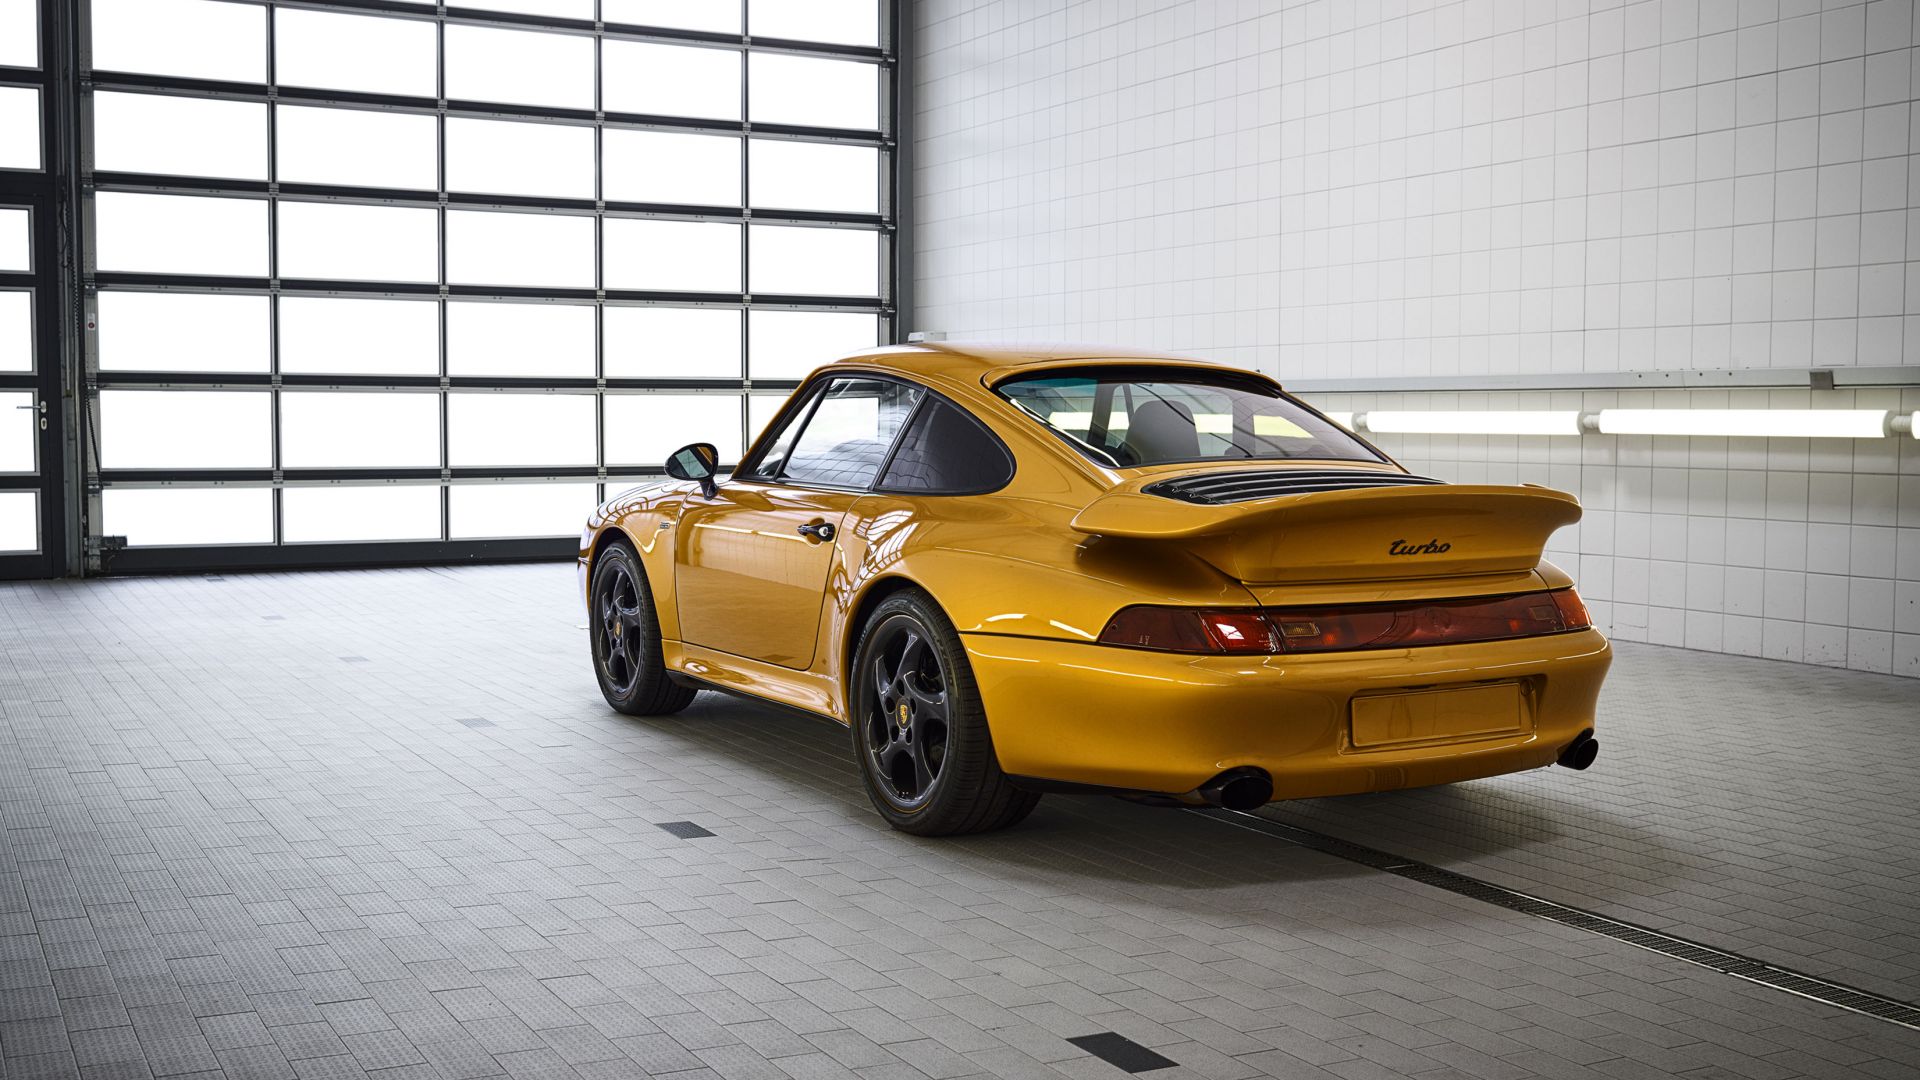 Porsche 993 Turbo S Project Gold, 2018 Cars, limited edition, 4K (horizontal)